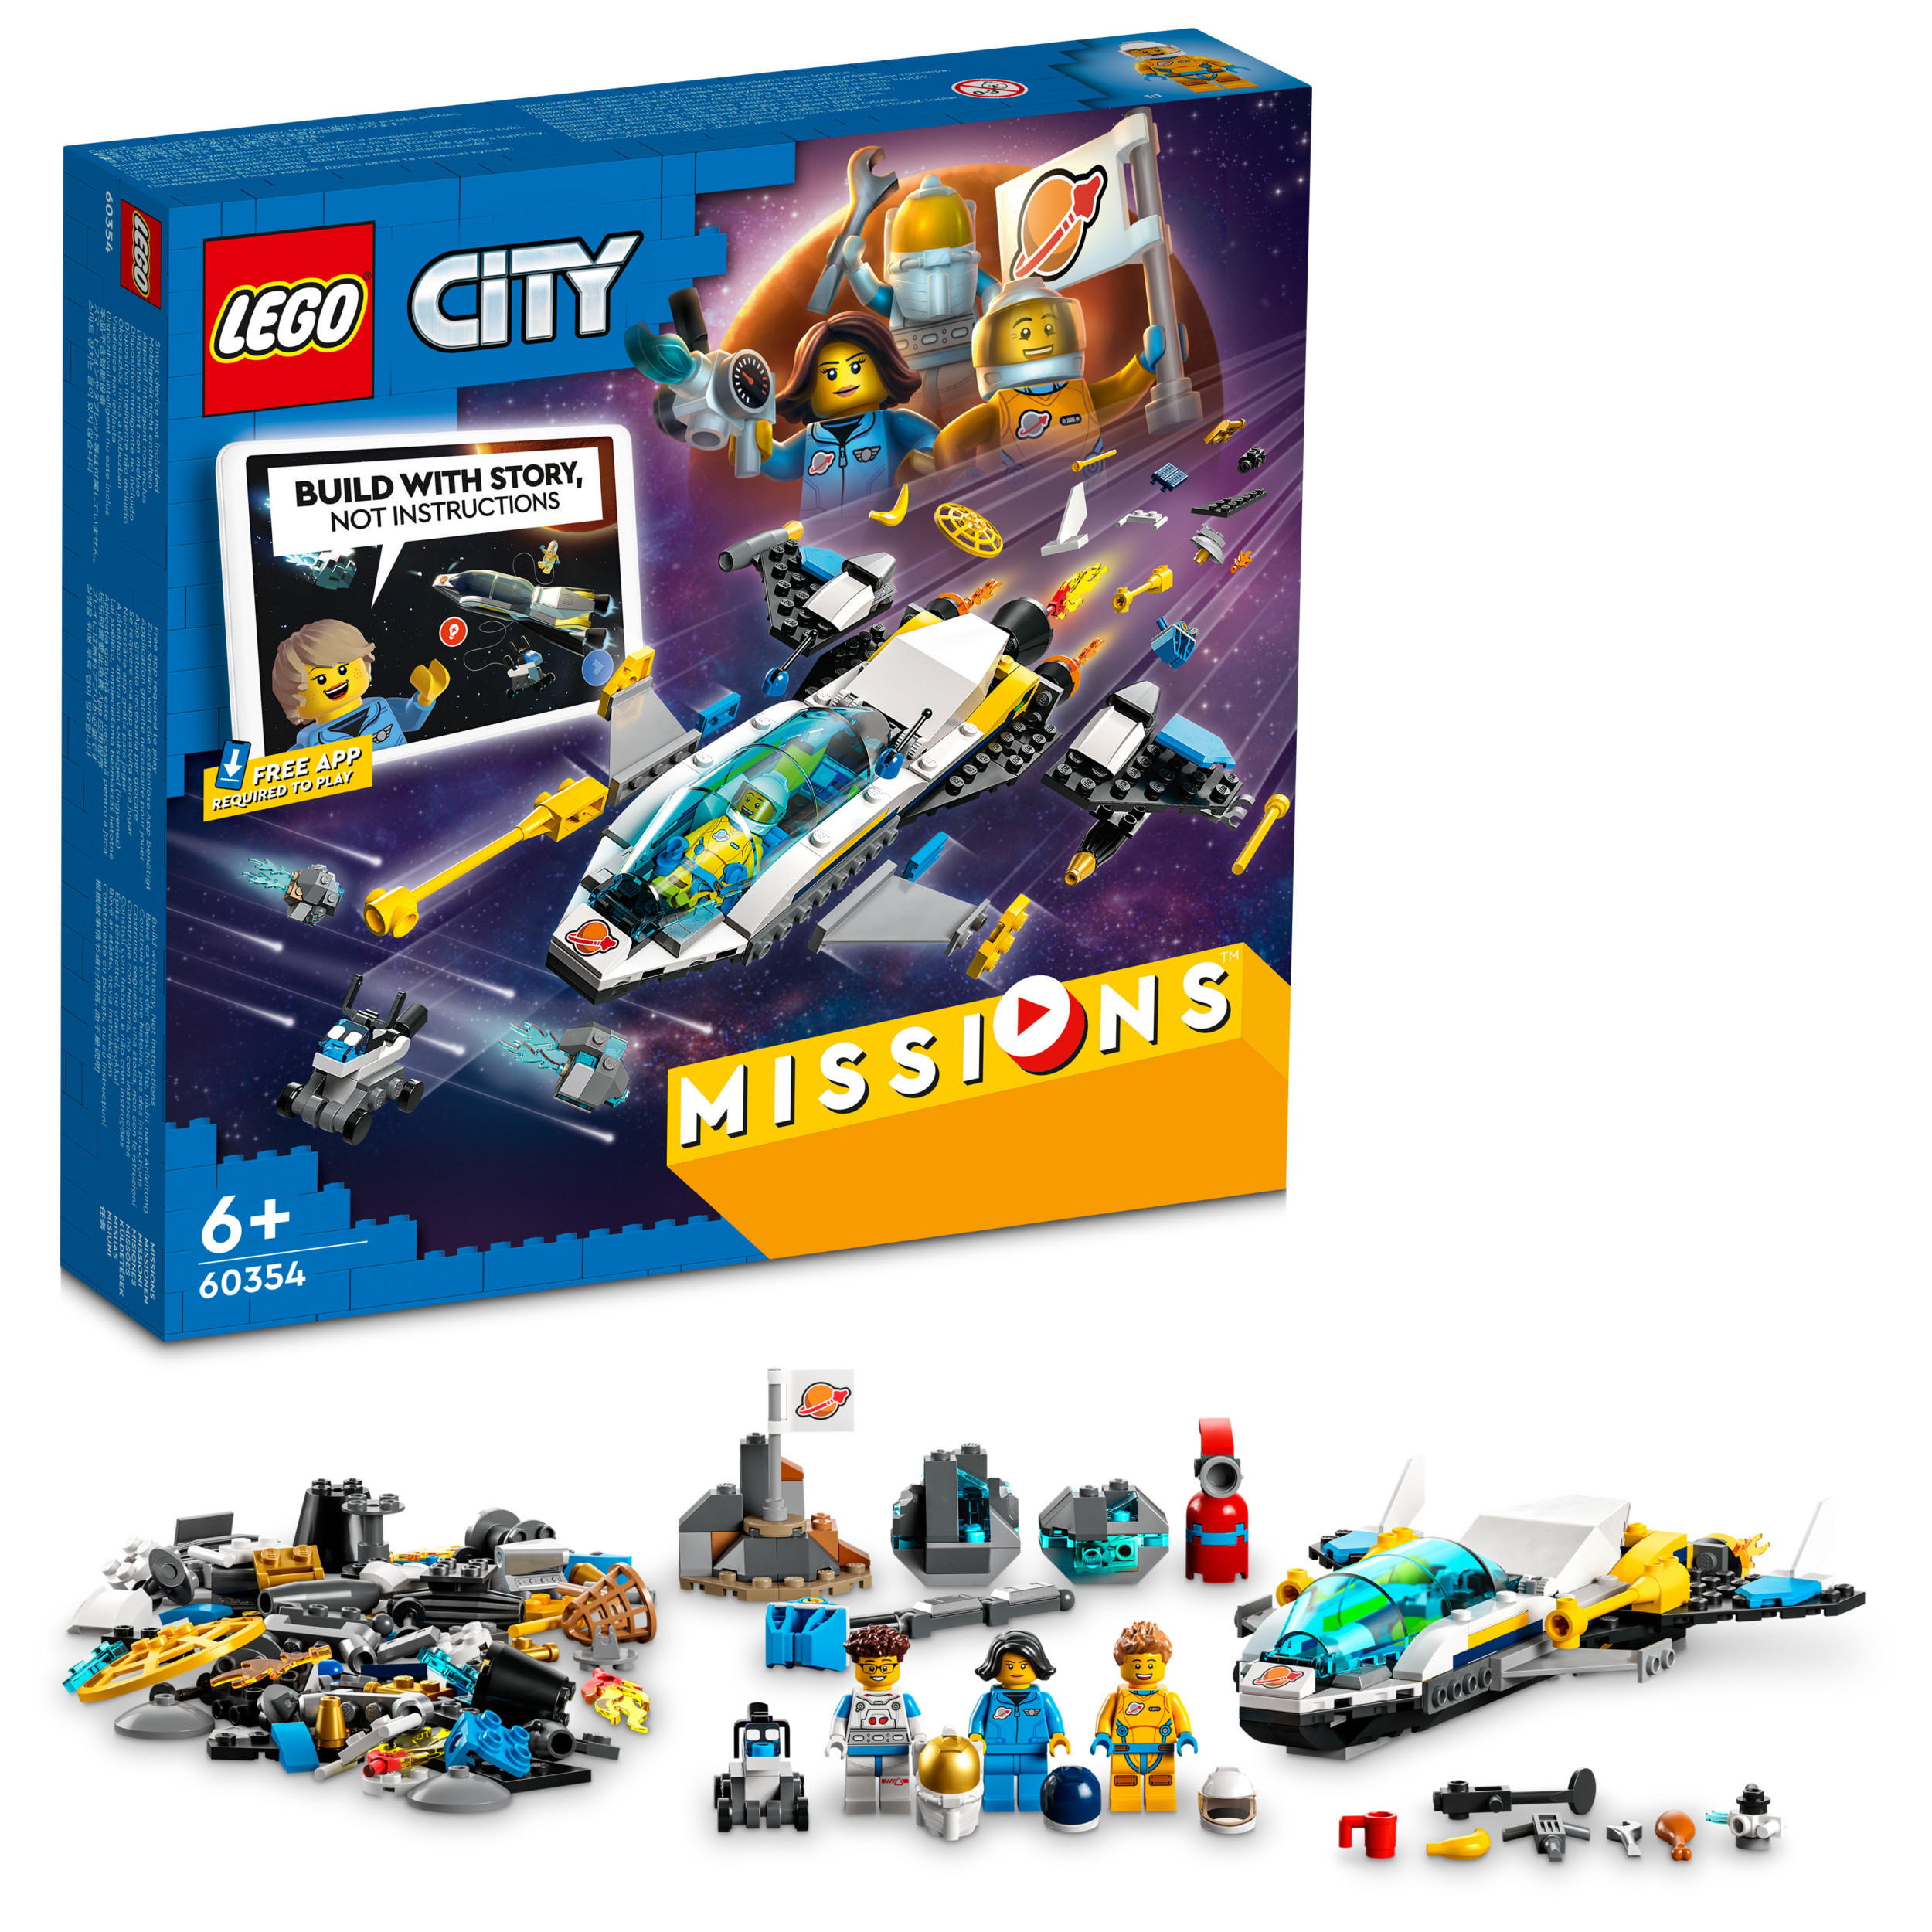 Lego introduces new story-based building experienceToy World Magazine | The business magazine with a passion for toys